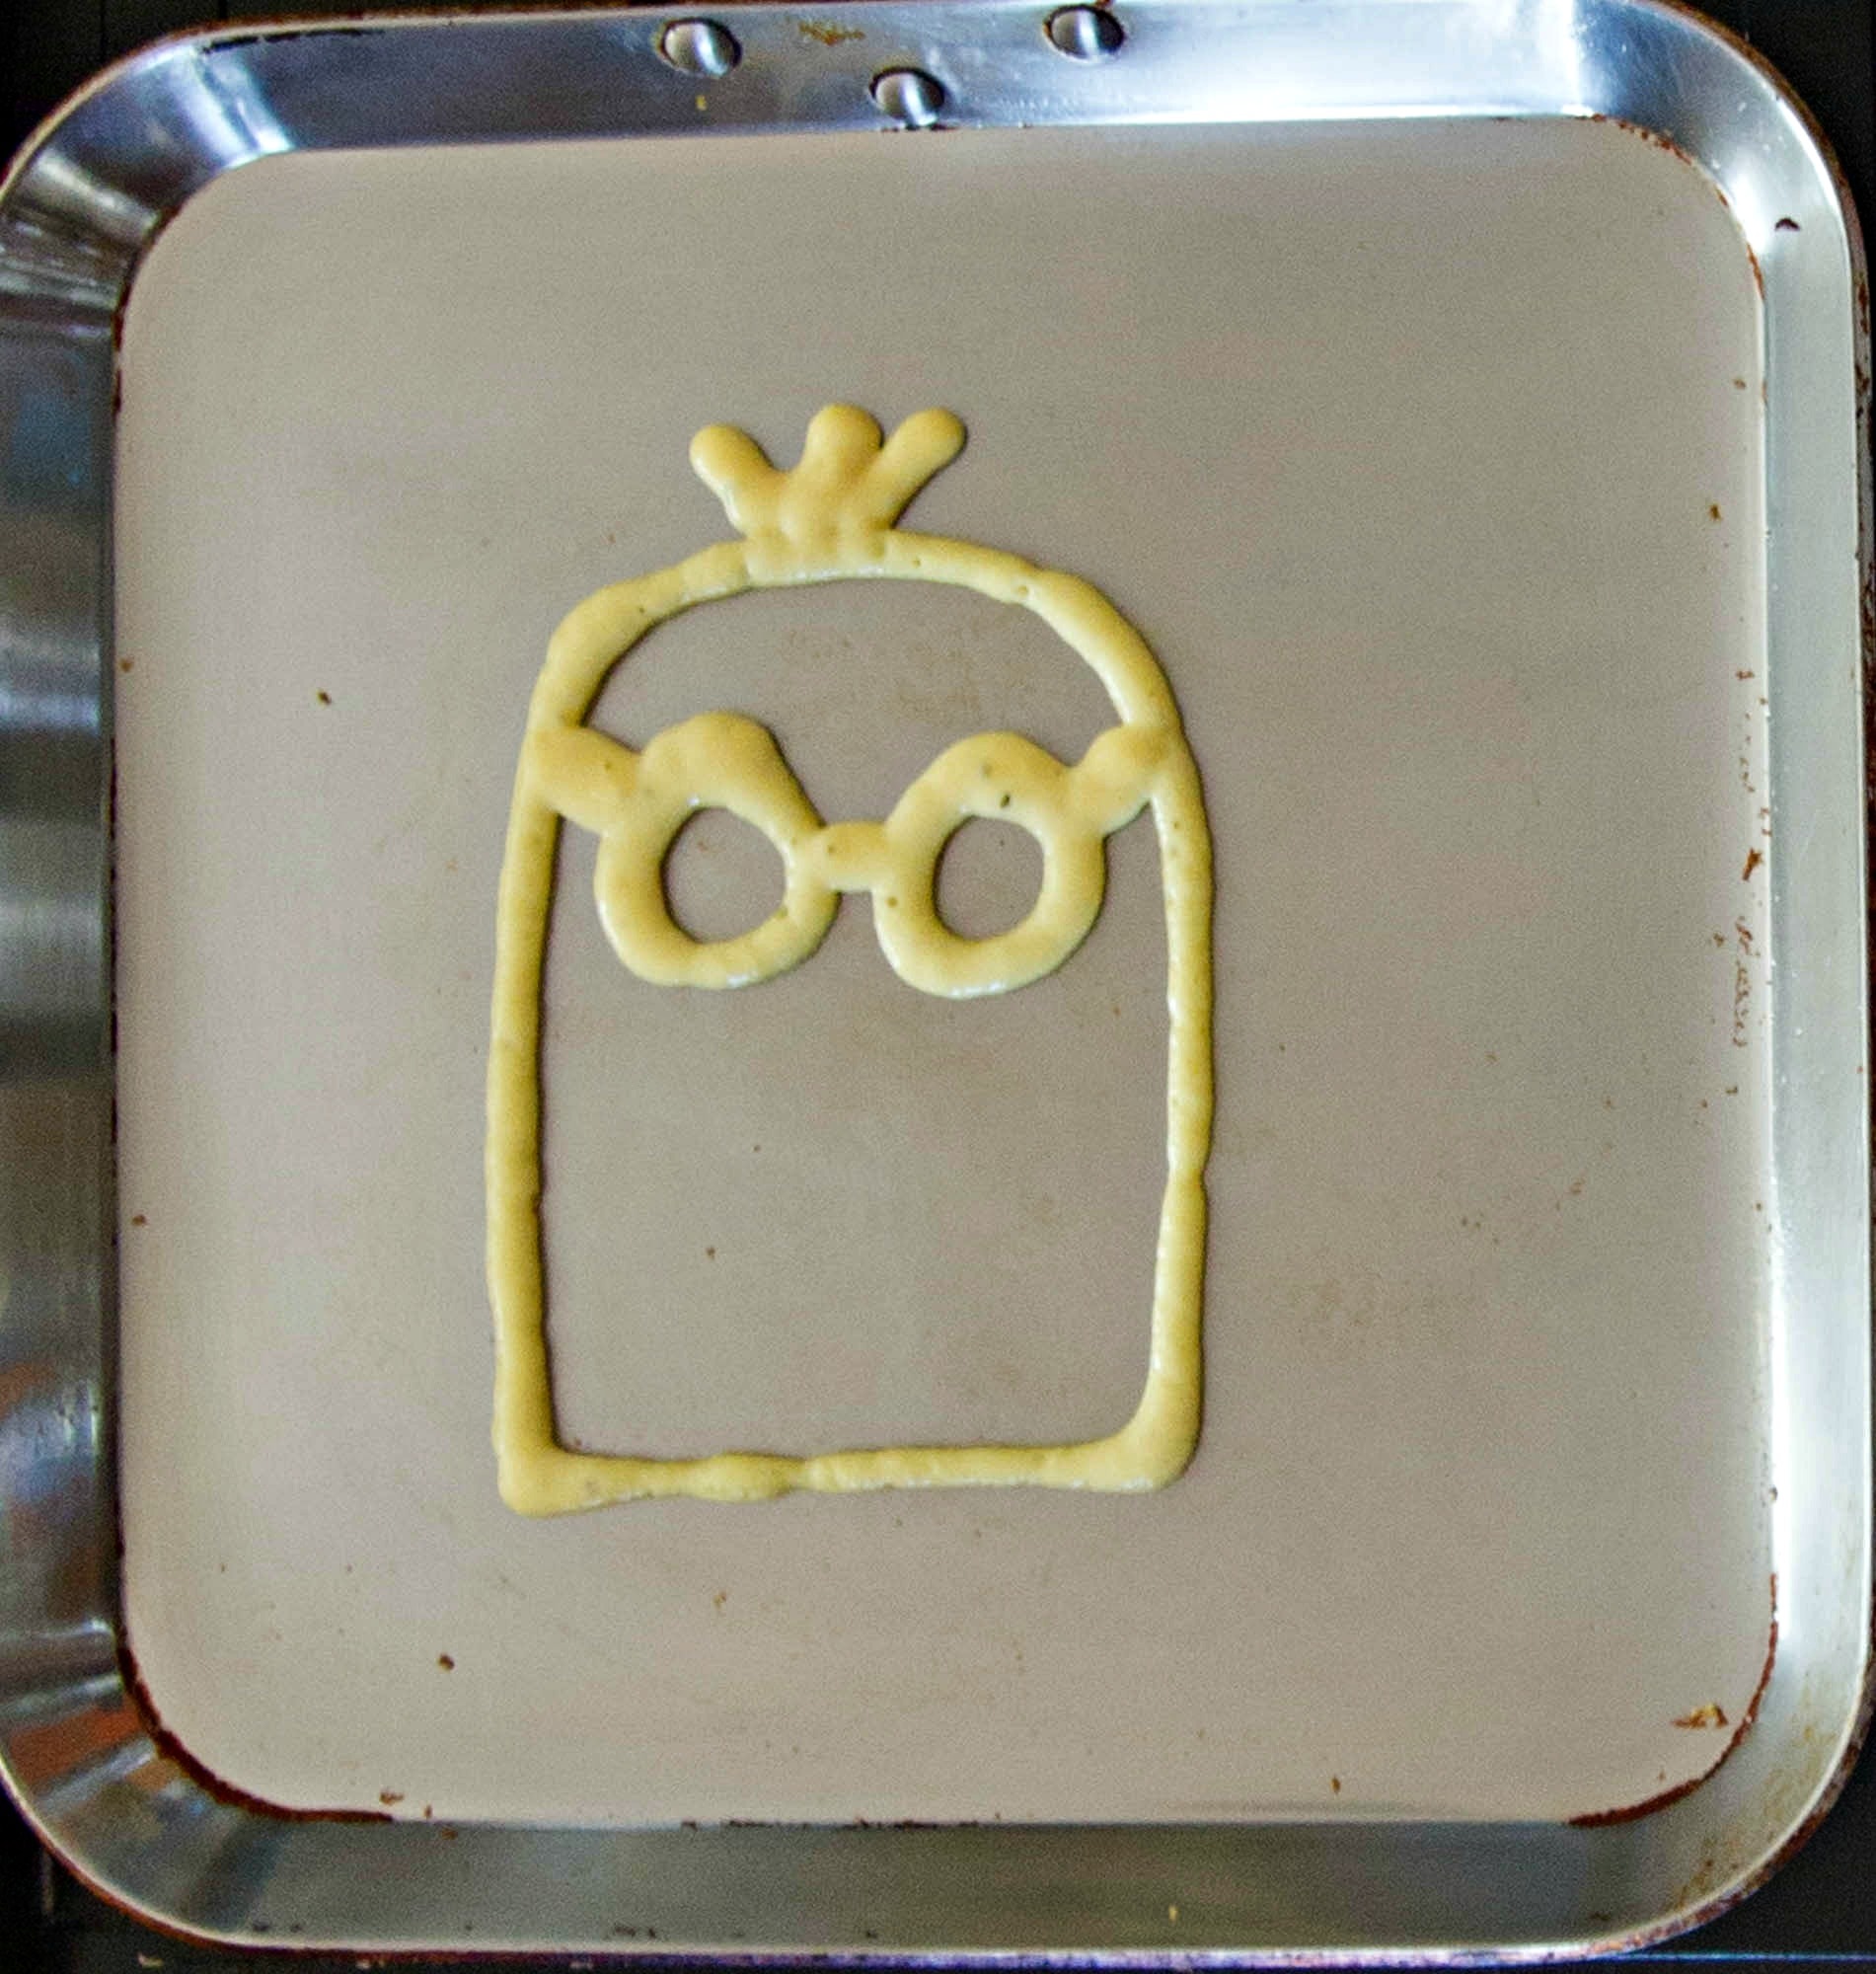 Easy to make Minoins Pancakes are the perfect meal for family movie night. Use pancake batter to create a simple minion, and top with blueberries and bananas.